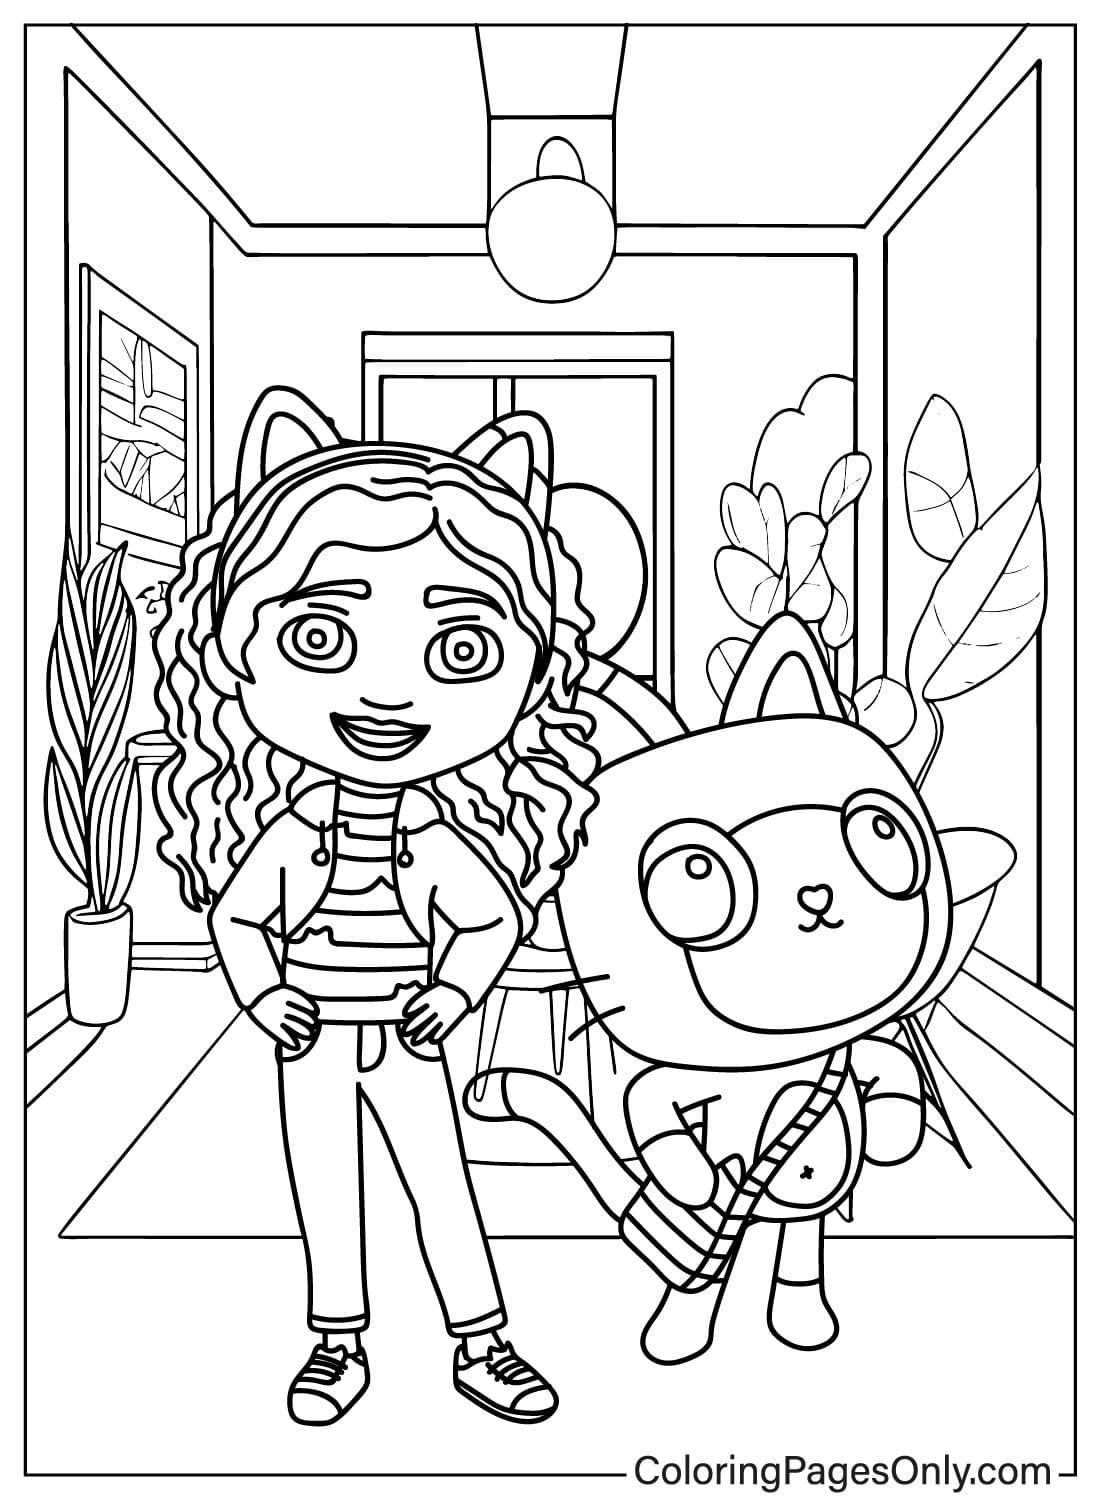 Gabby’s Dollhouse Coloring Page